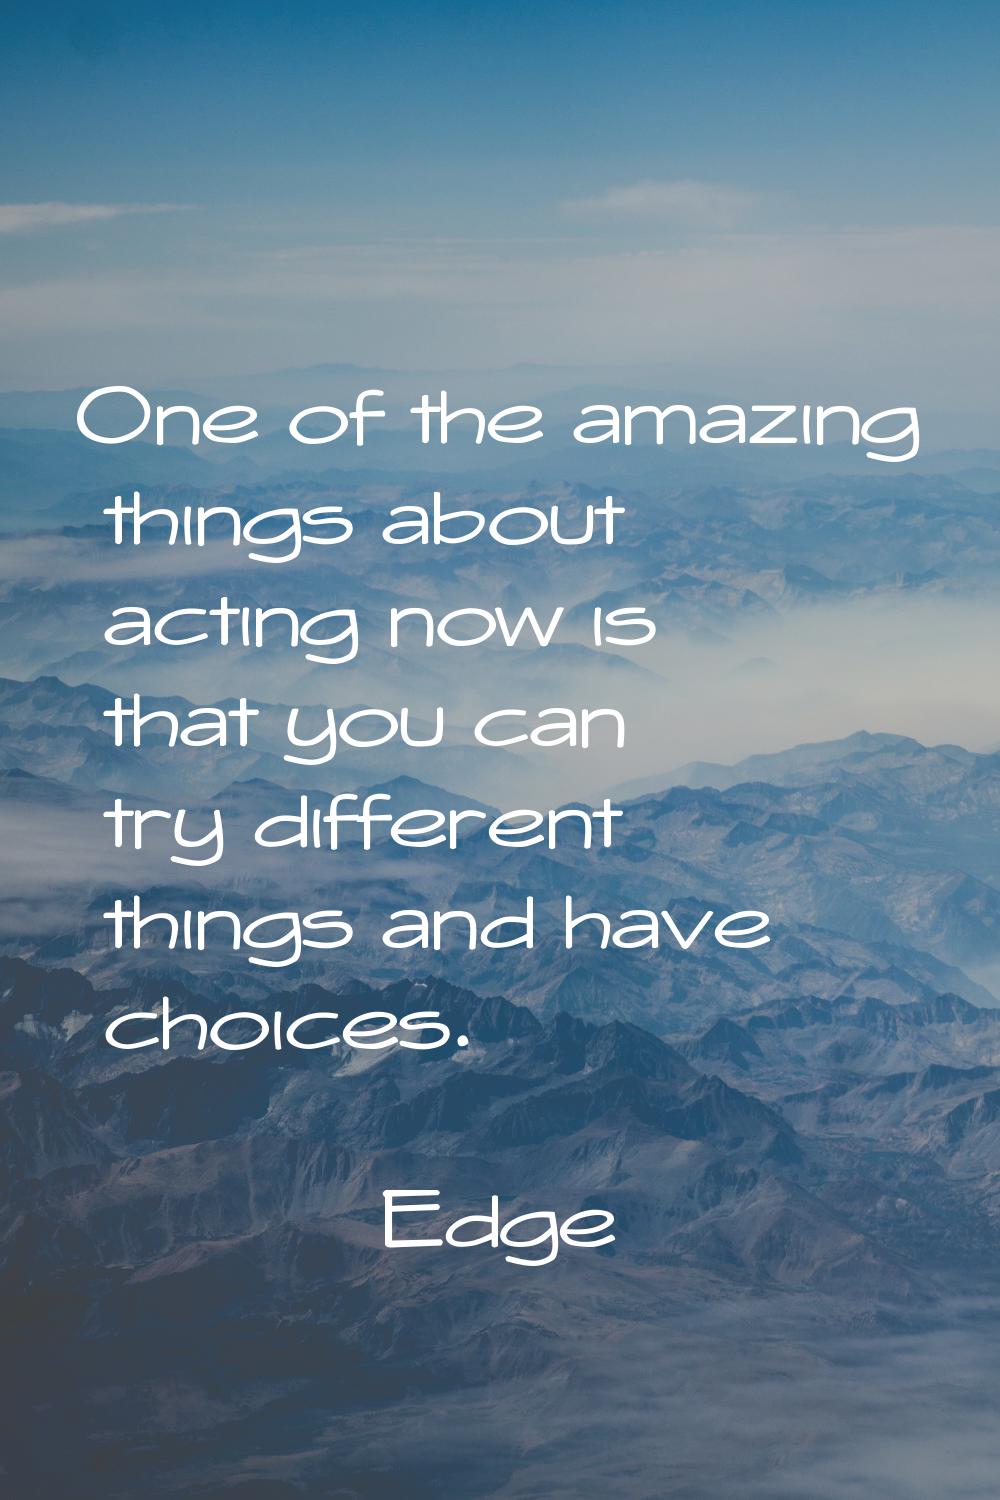 One of the amazing things about acting now is that you can try different things and have choices.